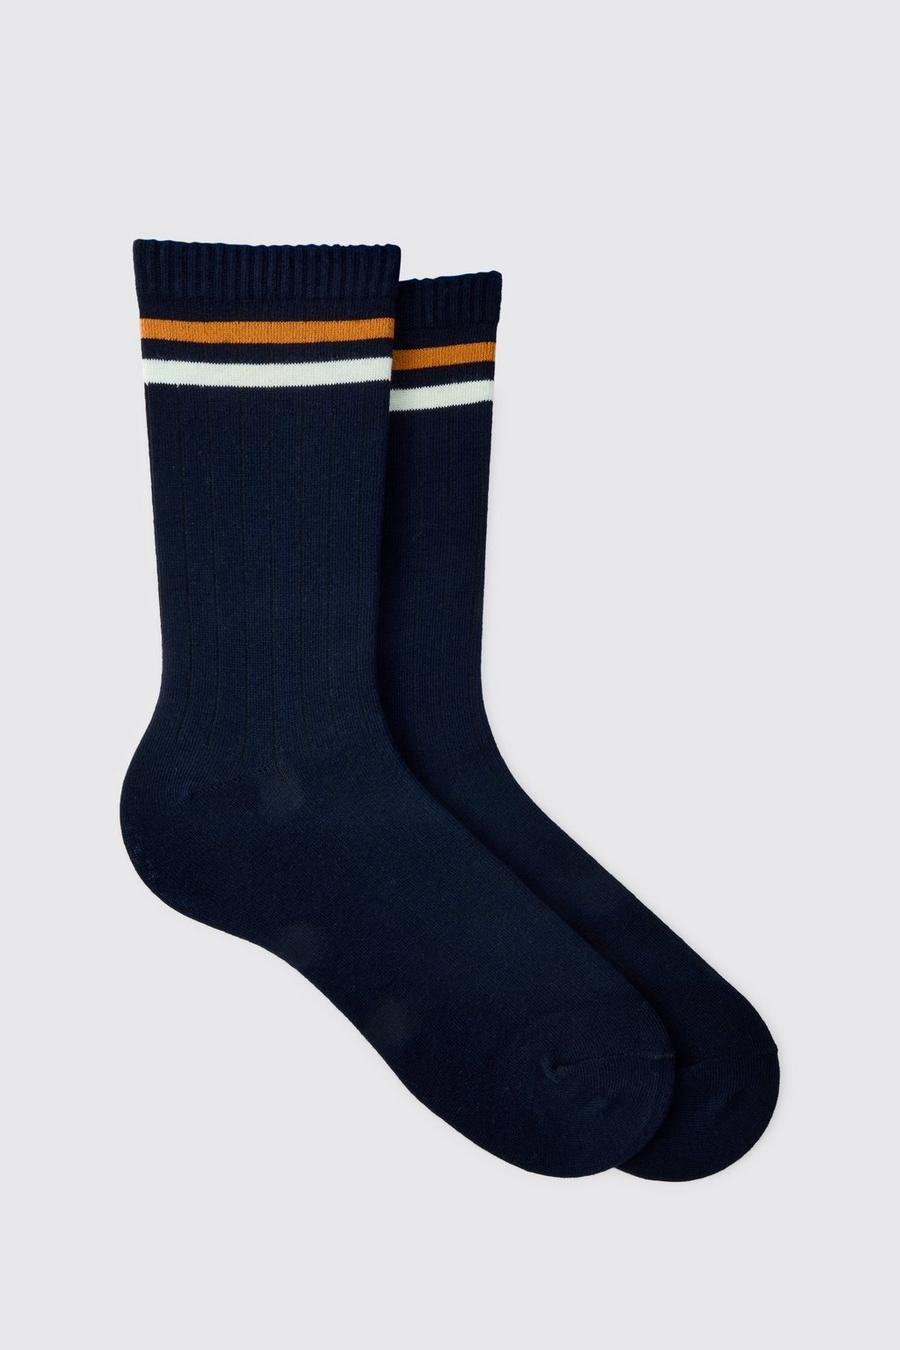 Chaussettes à rayures, Navy